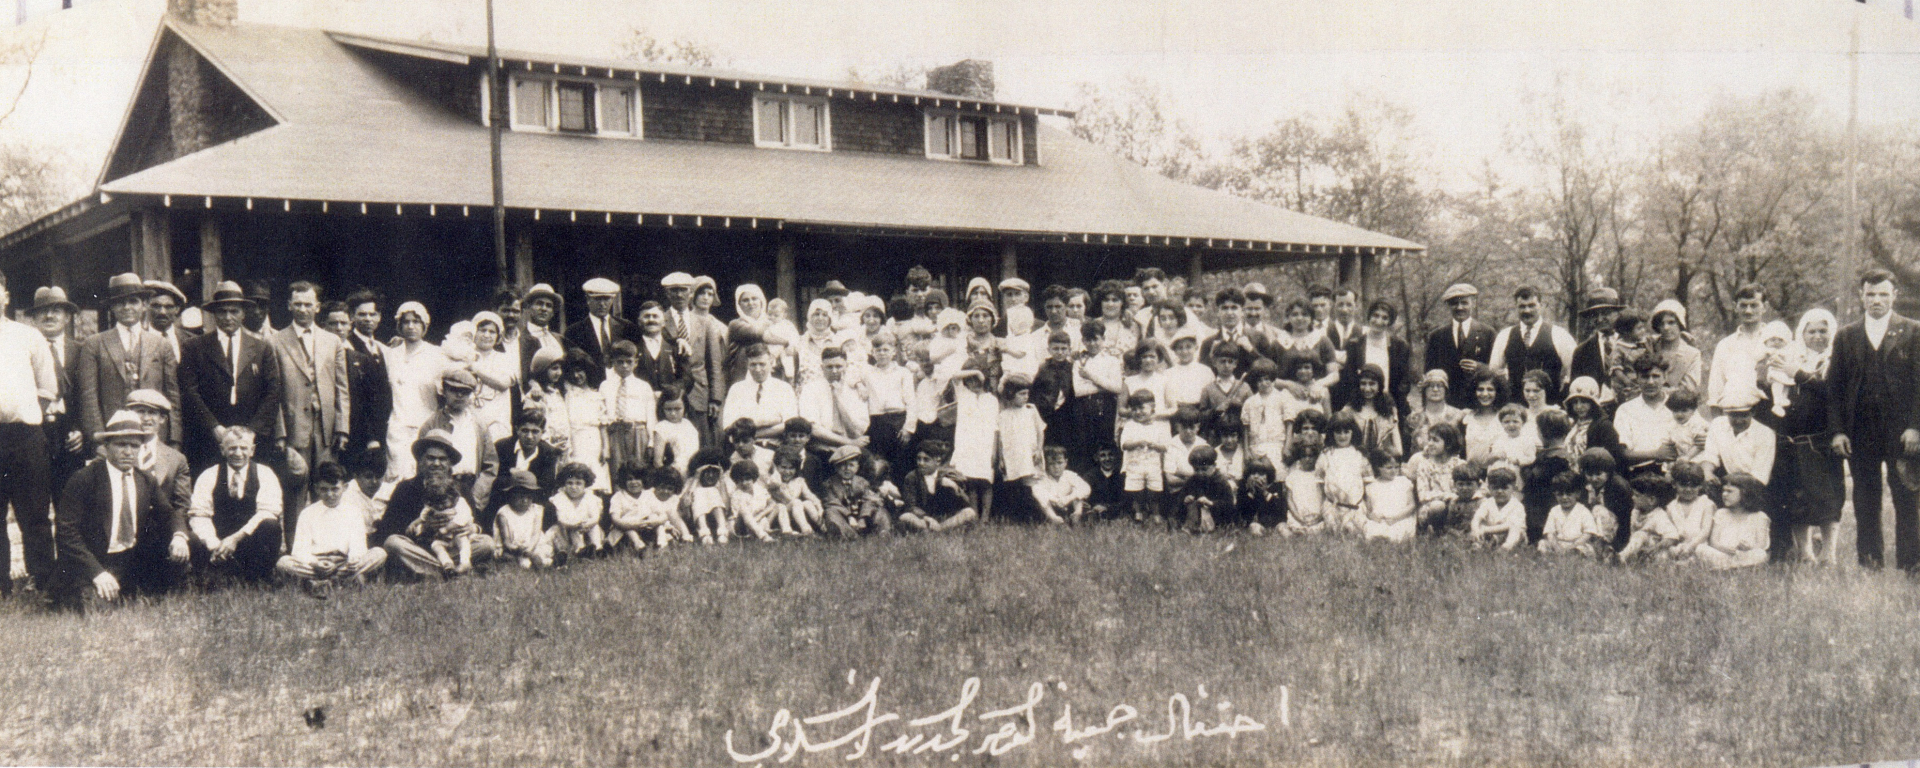 “Celebration of the New Generation Islamic Congregation”, c. 1920s. Photo HS16470. Collection: Julia F. Haragely papers. Source: Bentley Historical Library, University of Michigan.